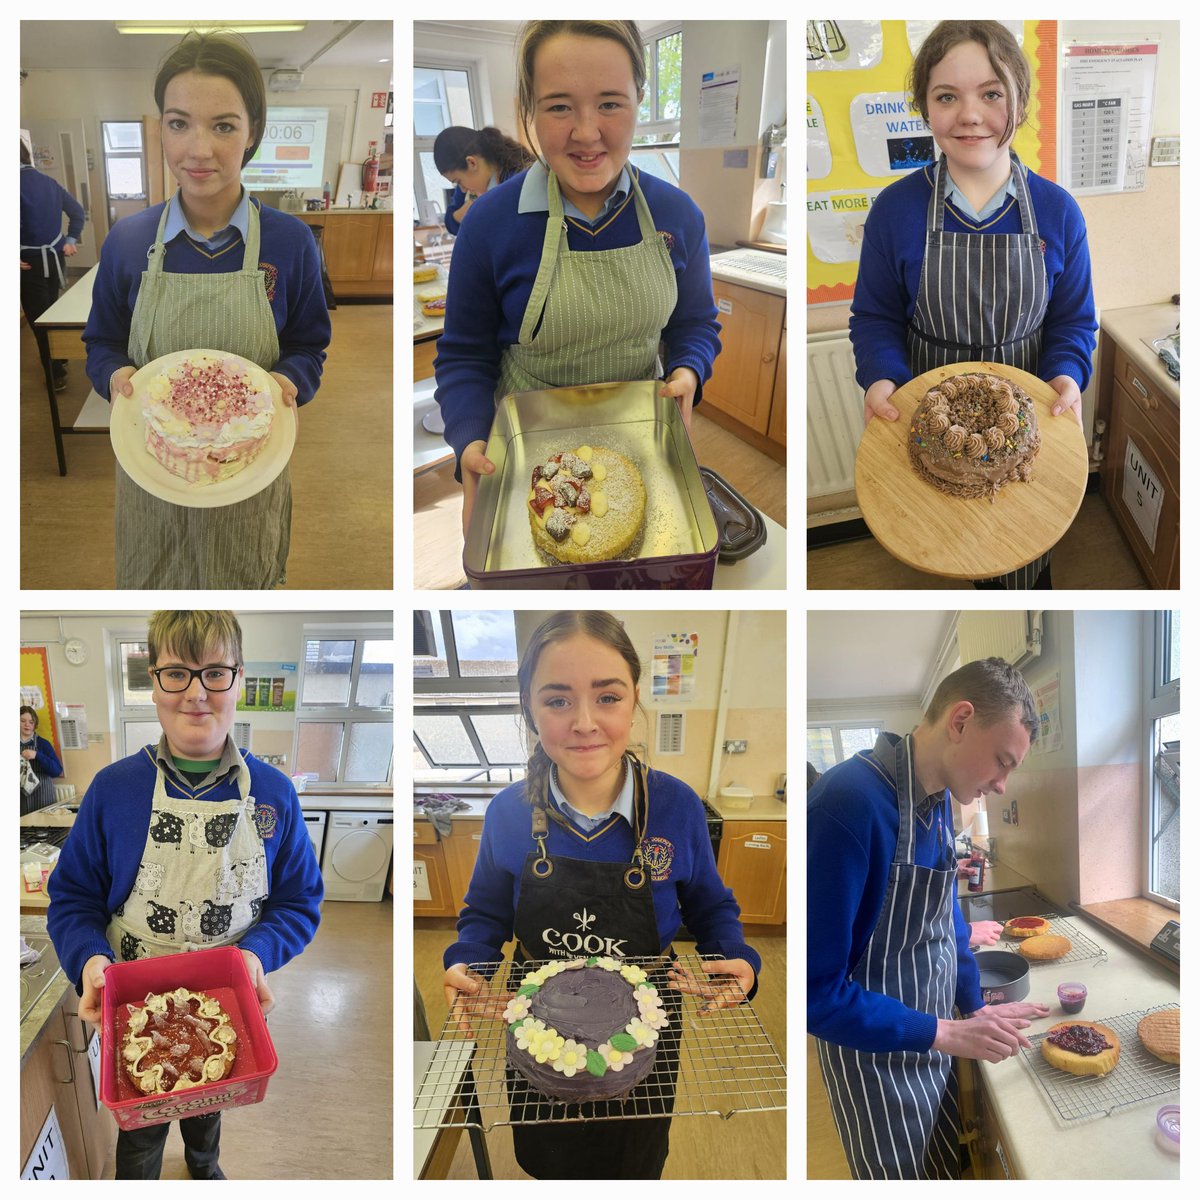 Home Economics 2nd years did a Victoria sandwich lesson today with a decorating competition at the end. I think we can all agree that they all look delicious. Well done to all.